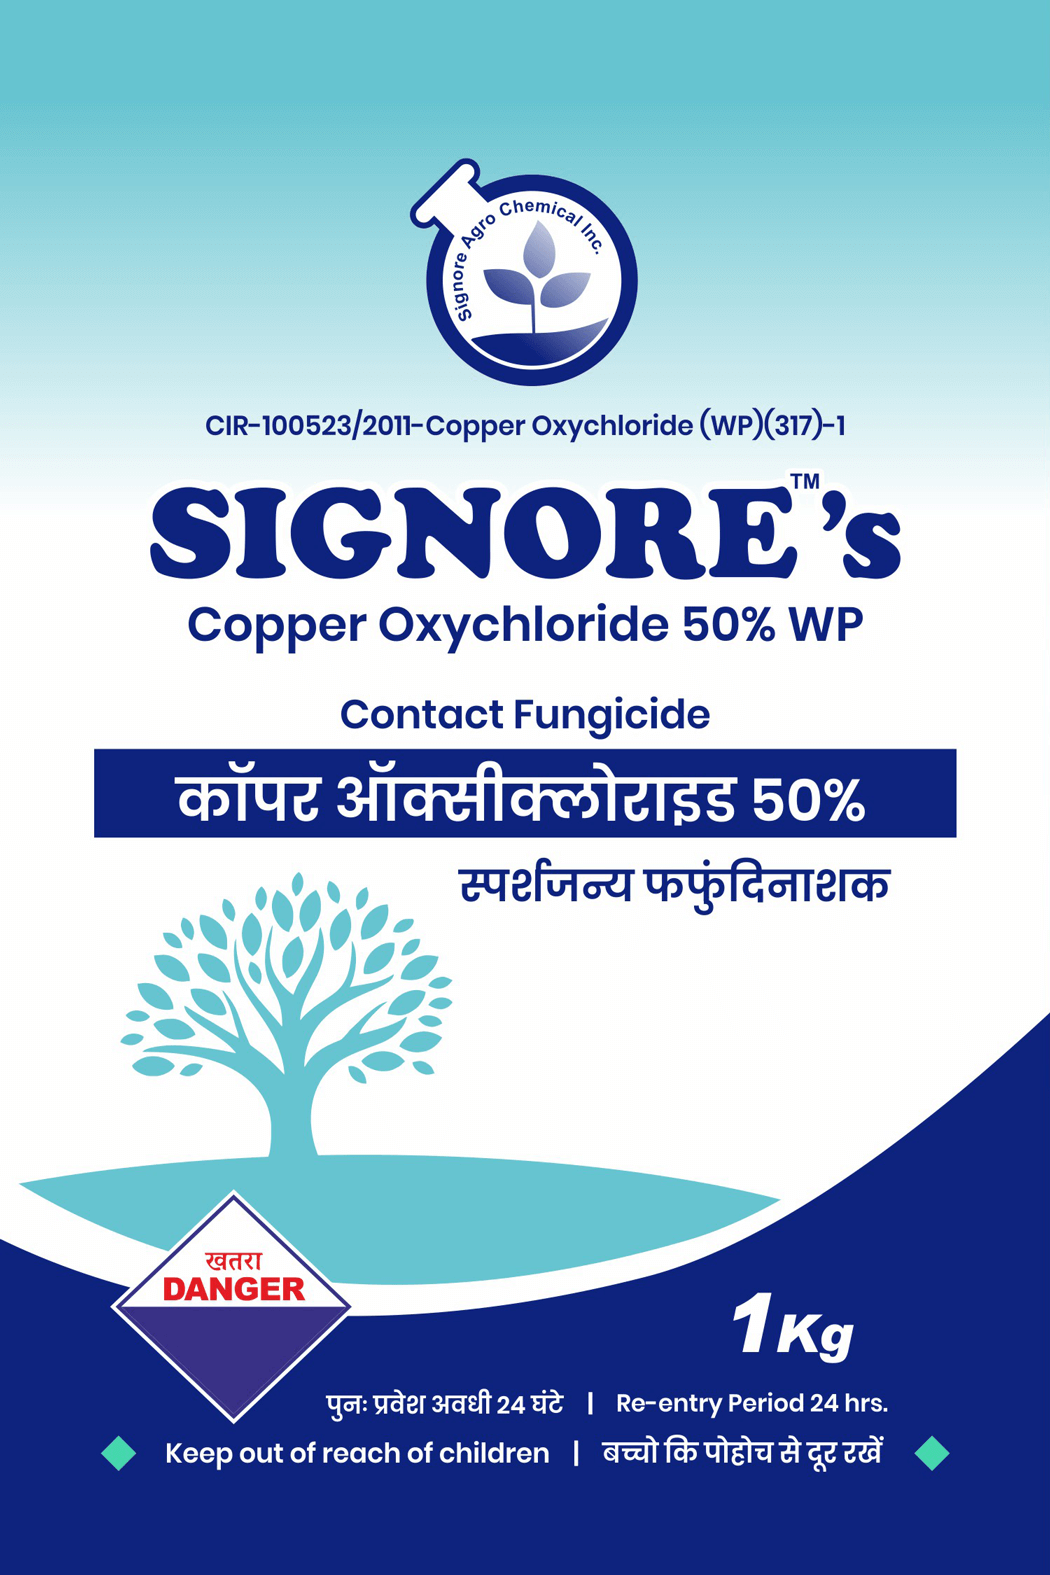 Copper Oxychloride 50% WP